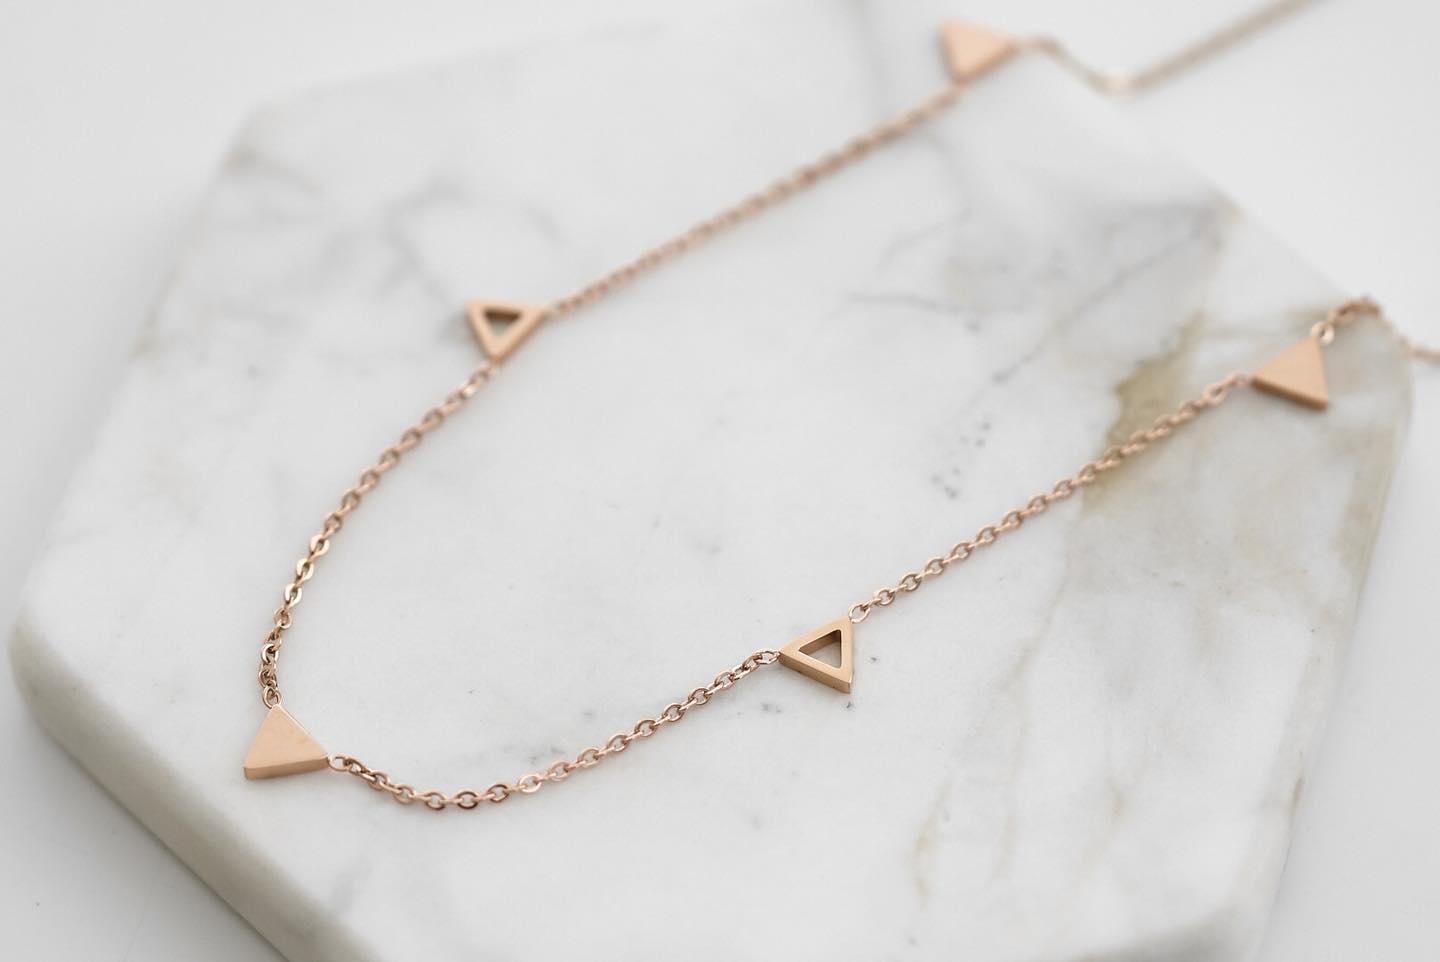 Goddess Collection - Rose Gold Tron Necklace